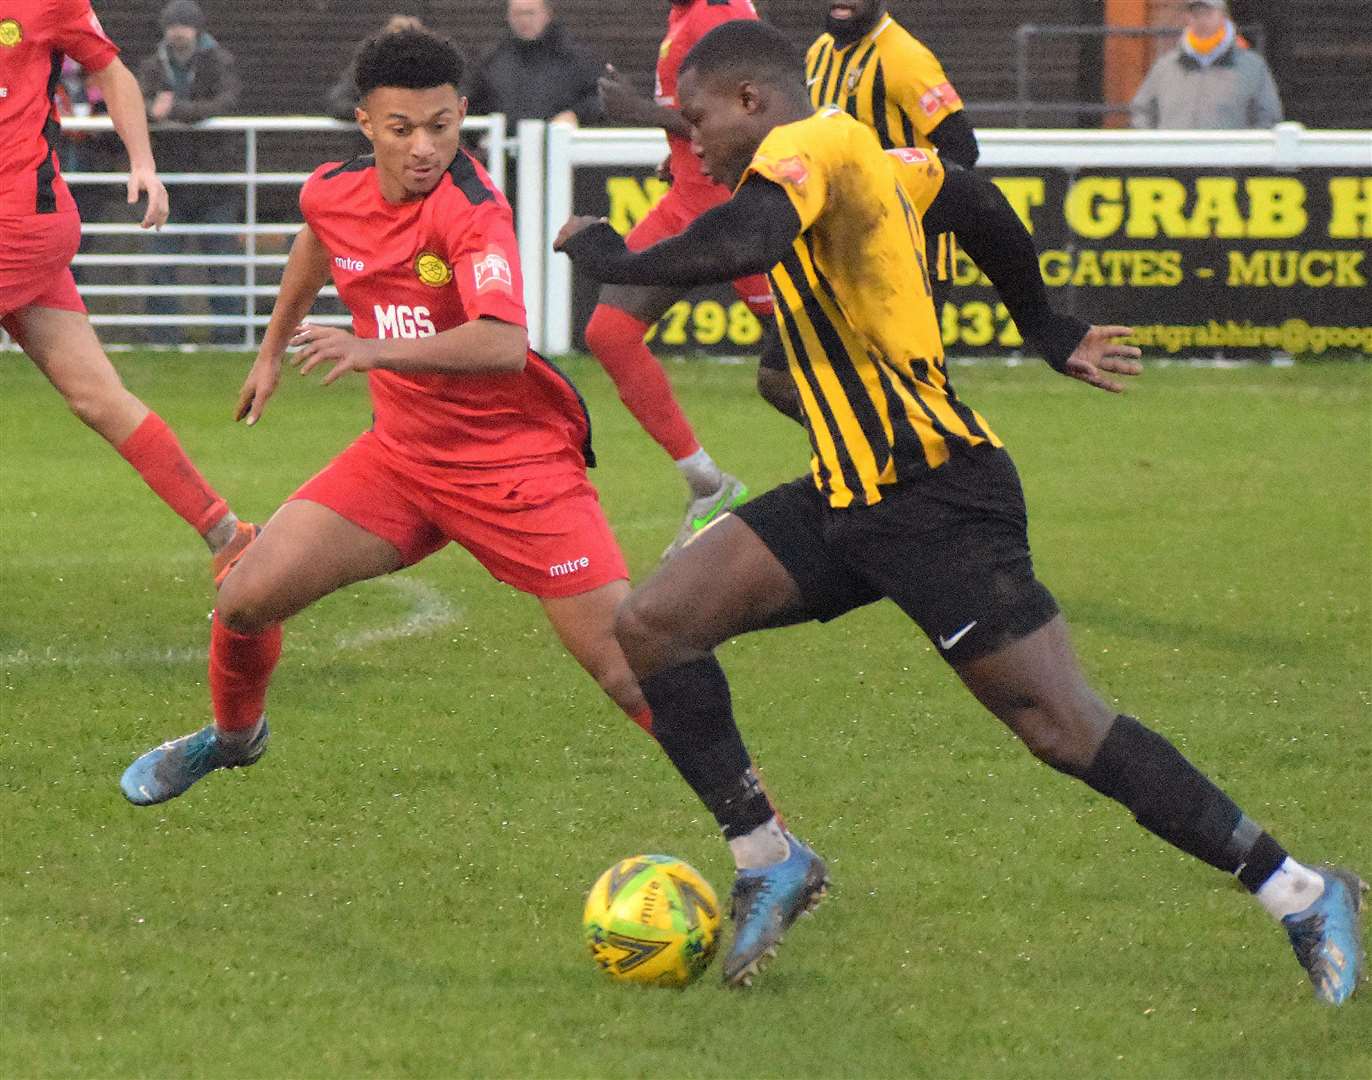 Folkestone striker Ade Yusuff drives at the Merstham defence during Invicta's 6-1 win on Monday. Picture: Randolph File